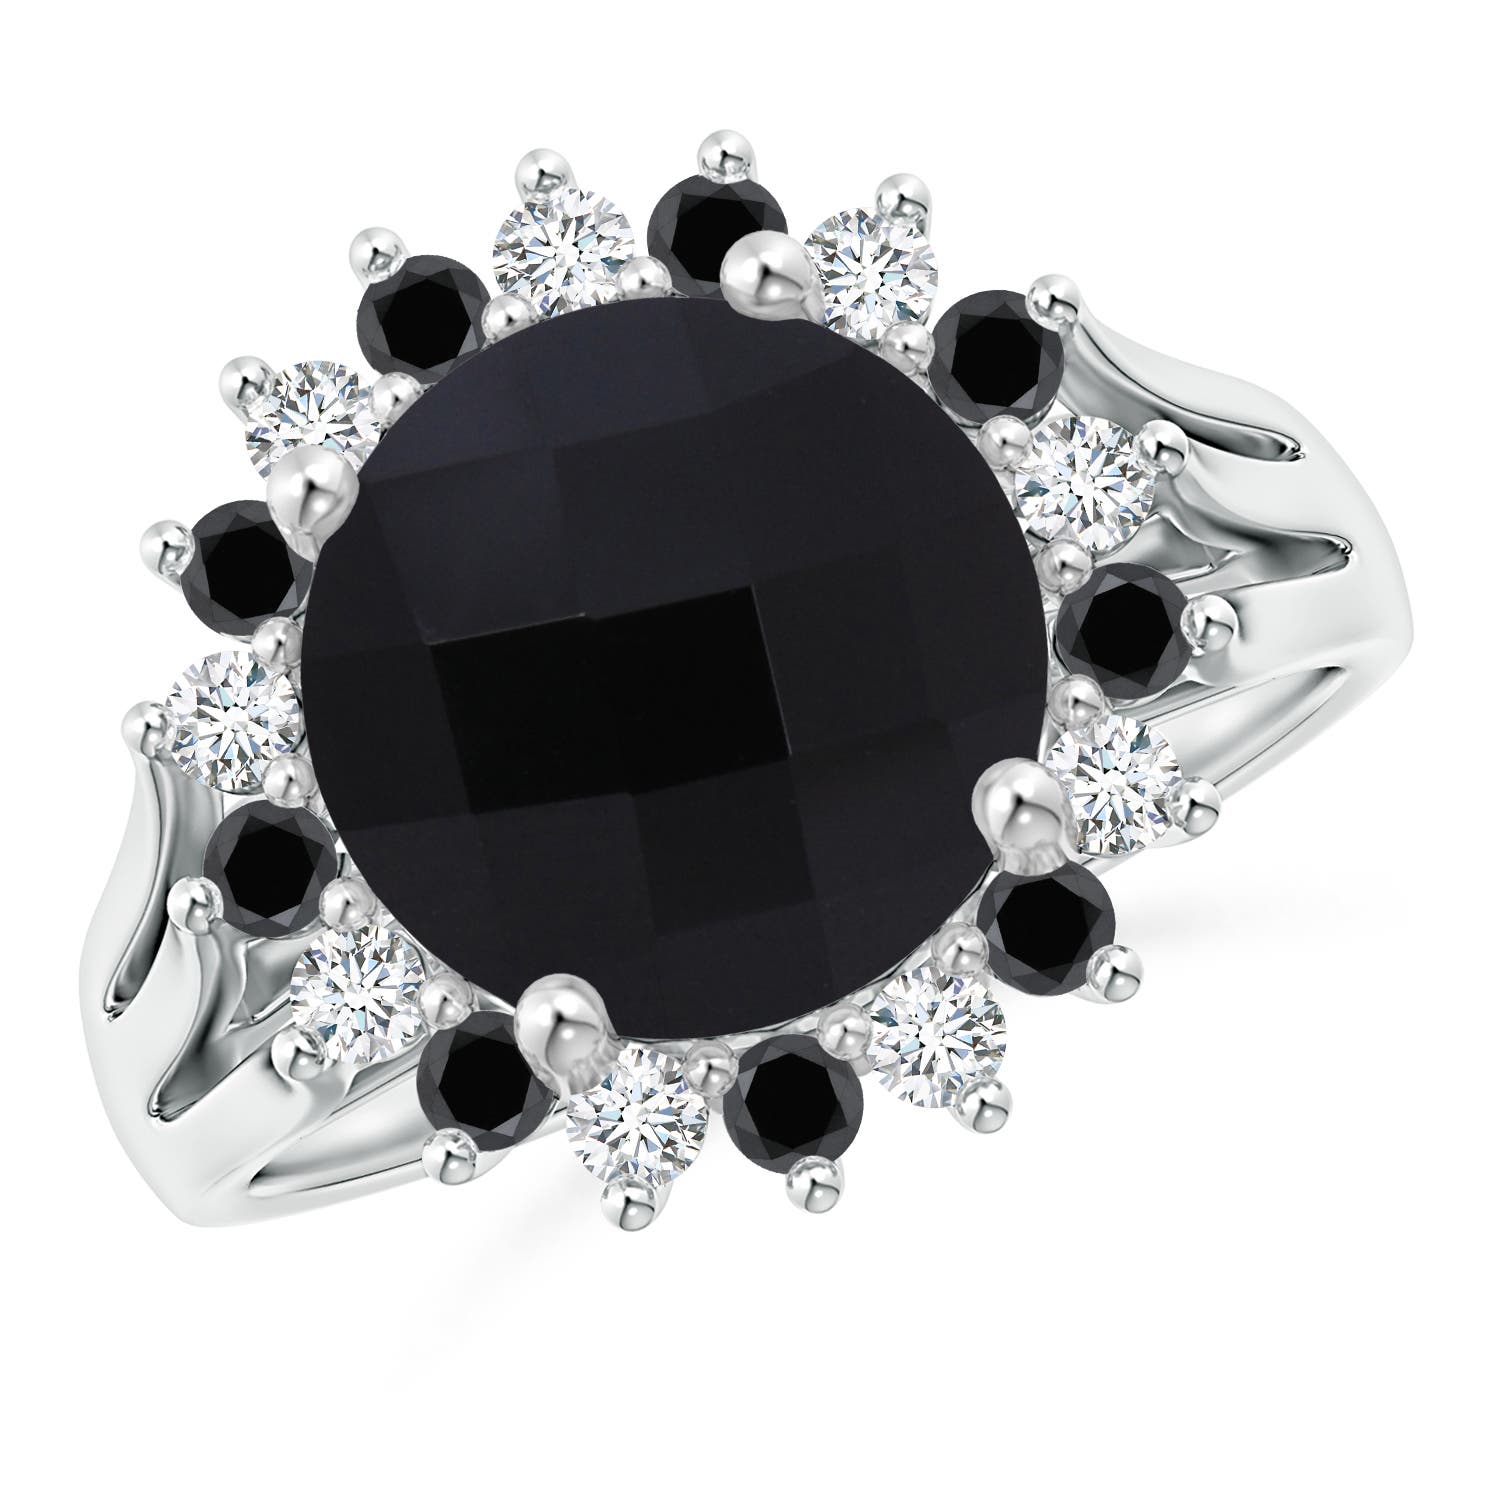 Shop Black Onyx Rings for Her in Canada | Angara